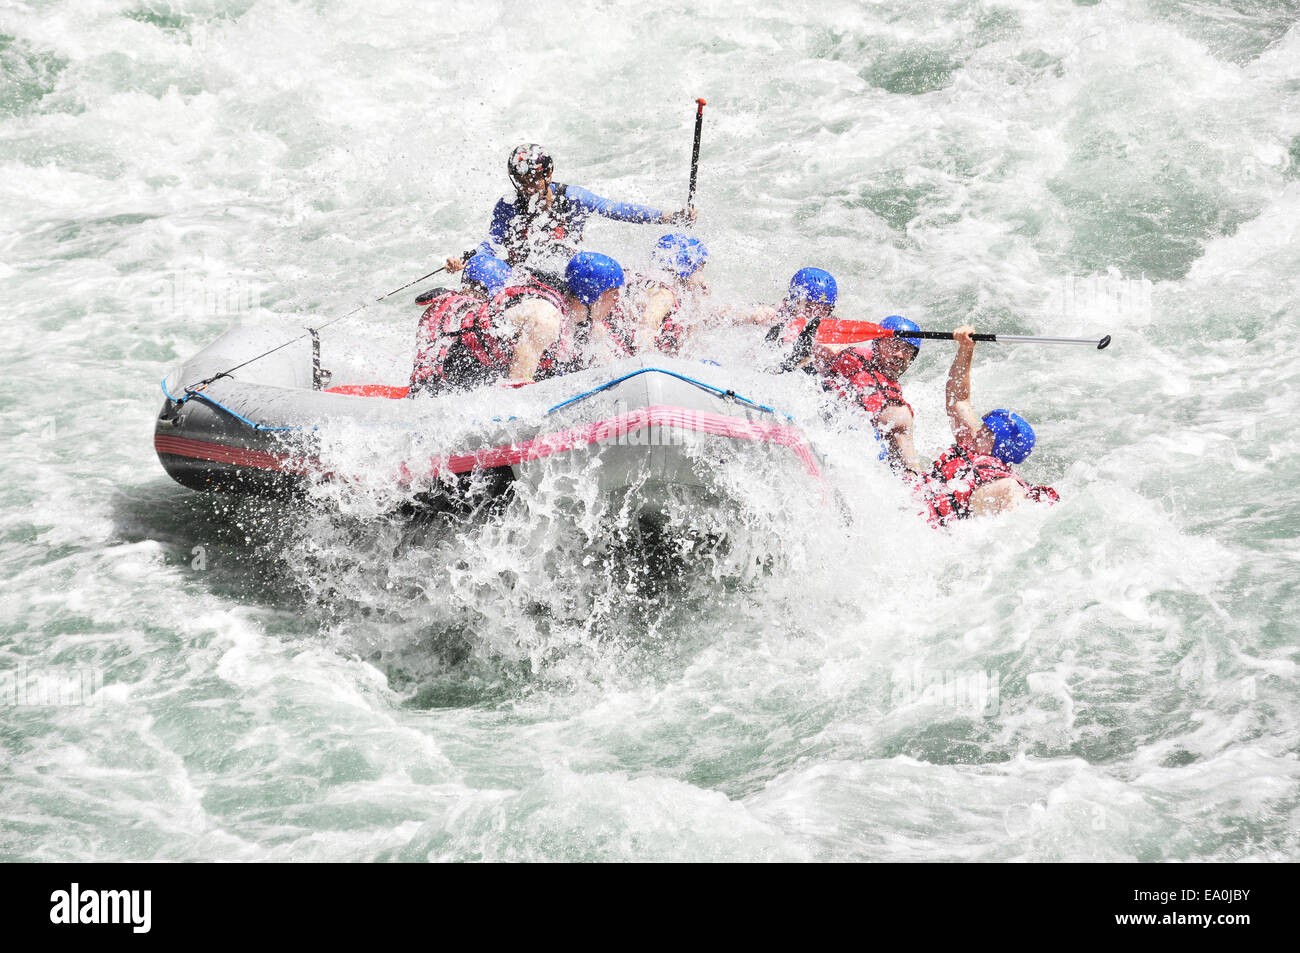 Rafting as extreme and fun sport Stock Photo